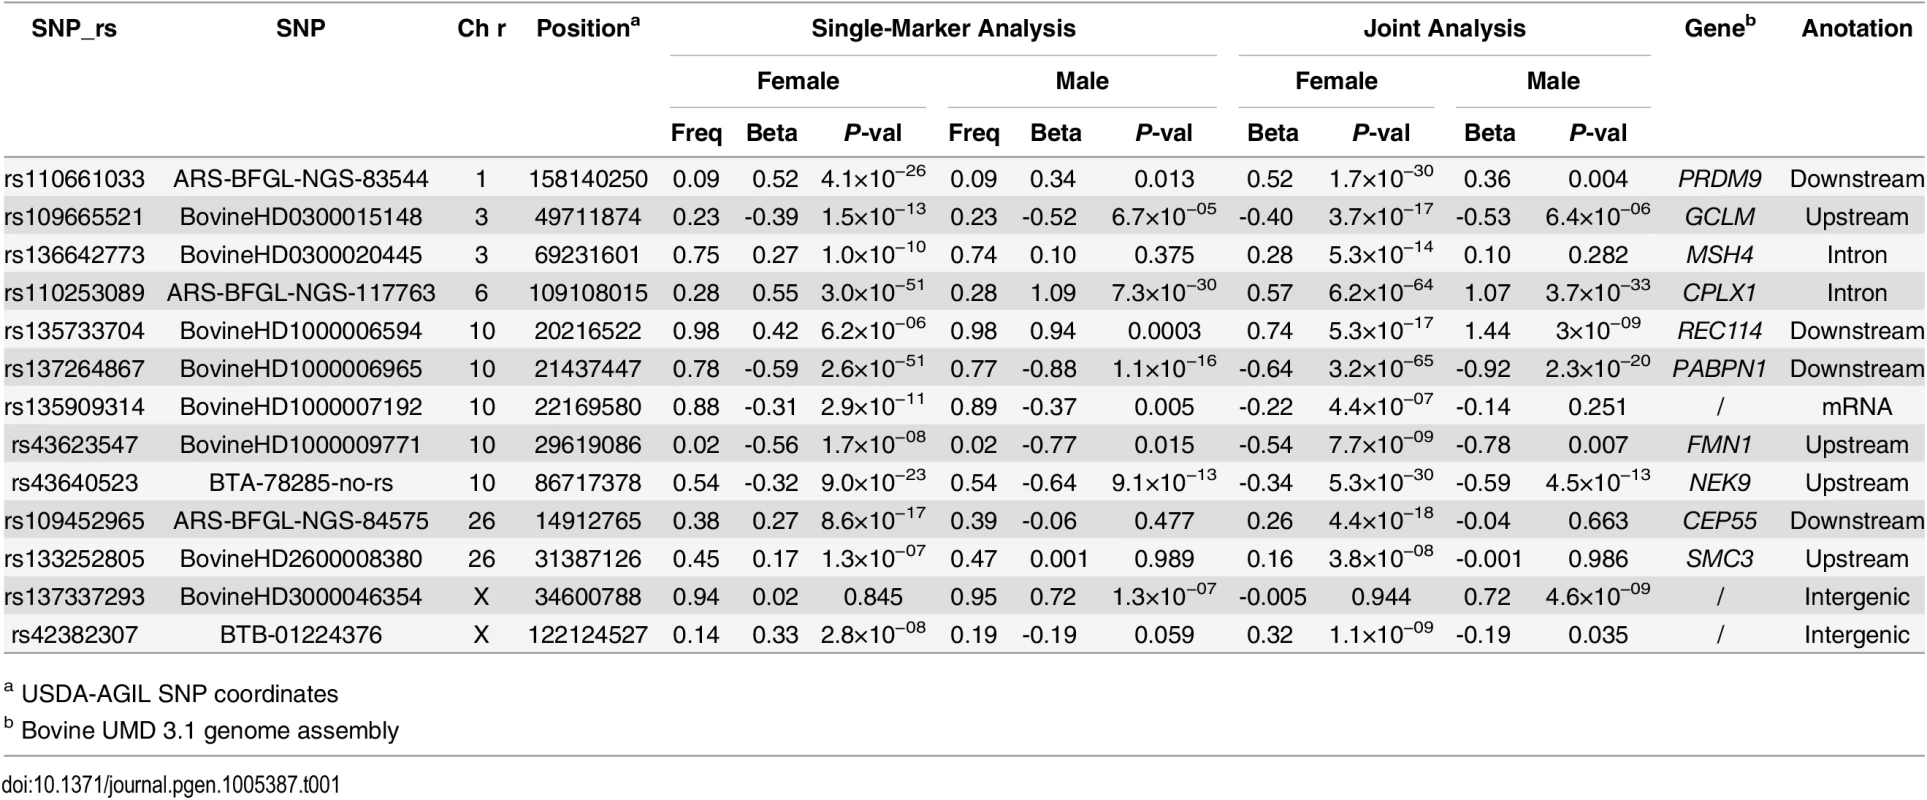 Independent SNPs associated with genome-wide recombination rate in females and males.